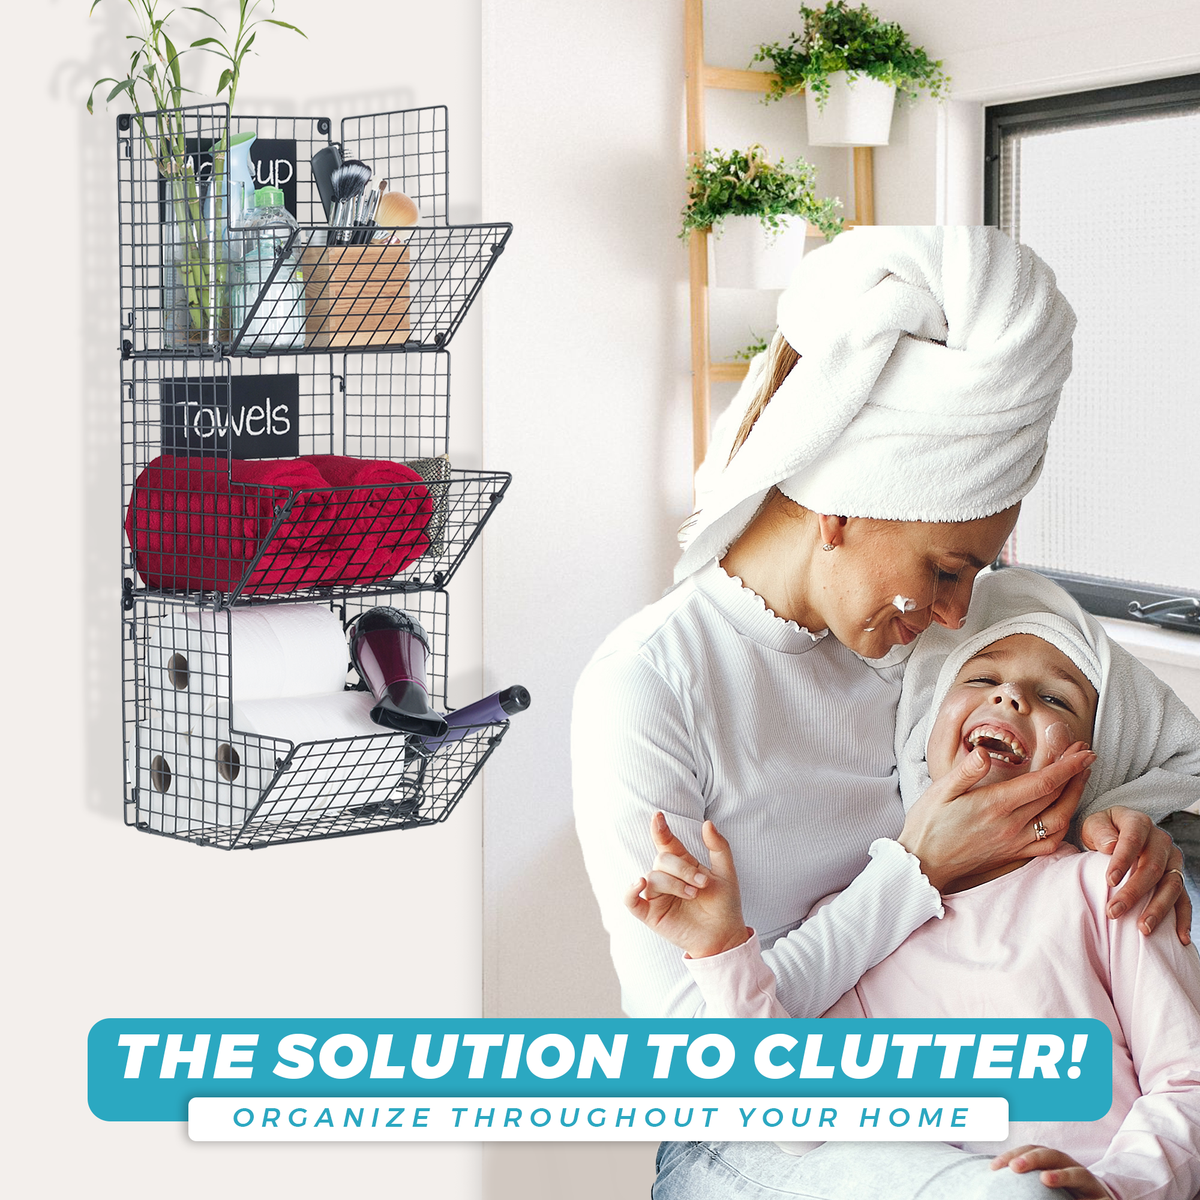 Assembled 3-tier wire storage bins stuffed with bathroom ammenities as solution to clutter